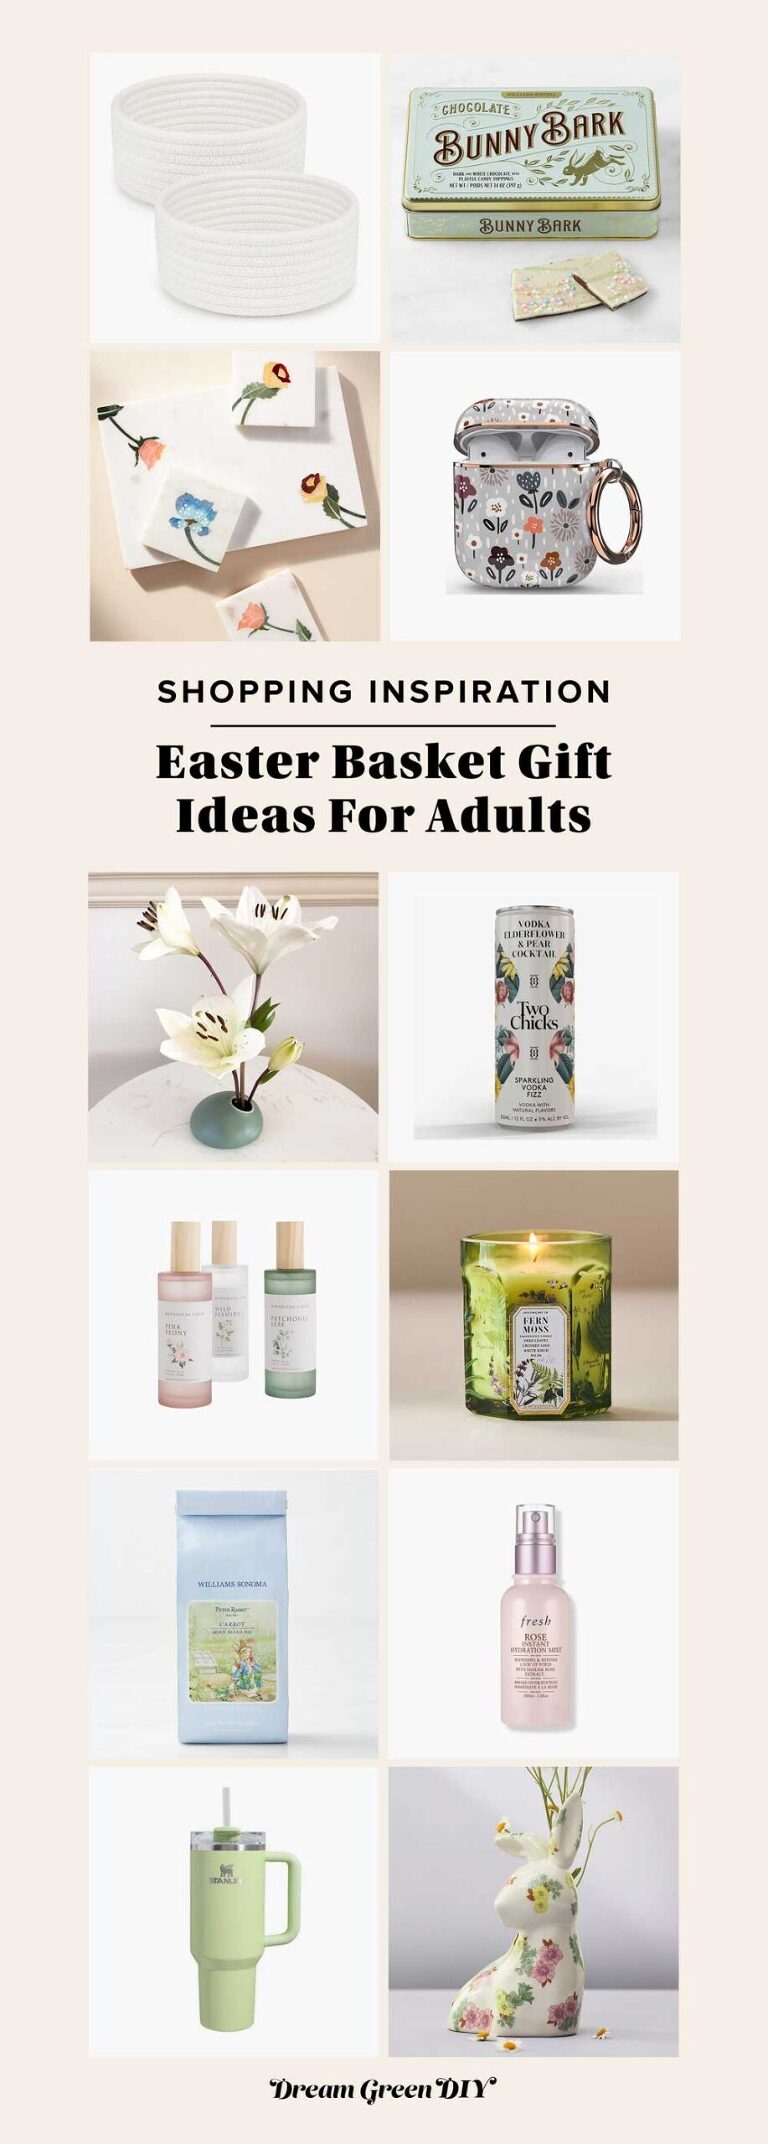 Easter Basket Gift Ideas For Adults